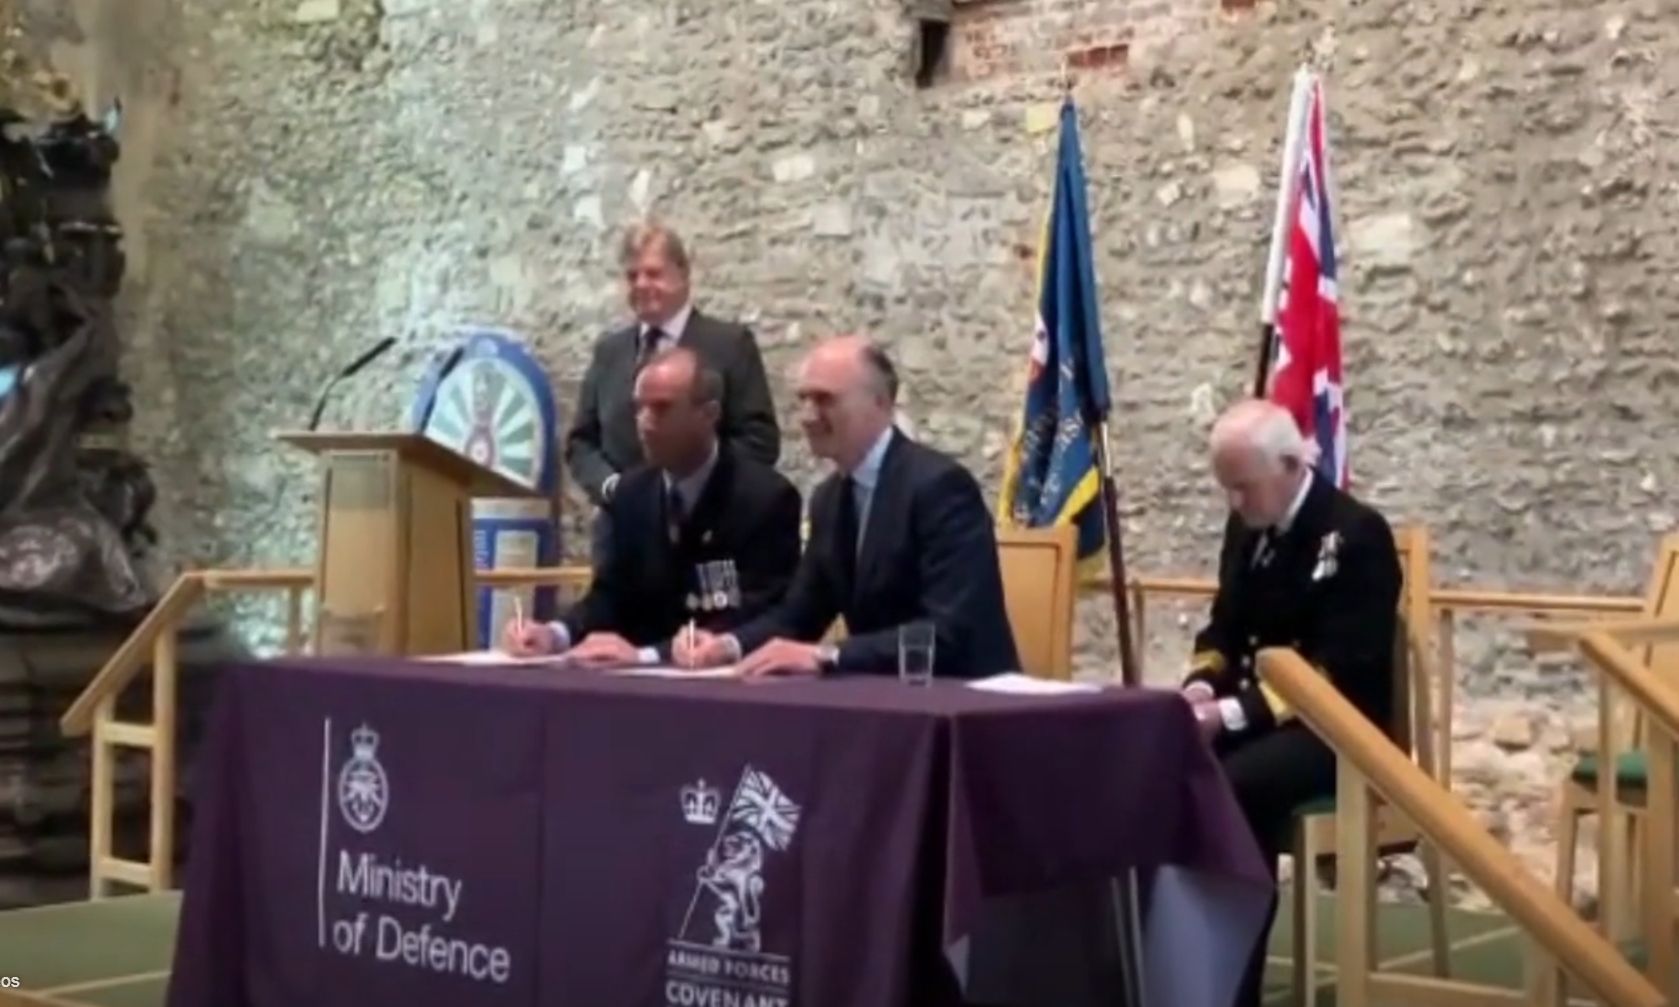 Hampshire/England - Freemasons cement relationship with military by signing Armed Forces Covenant